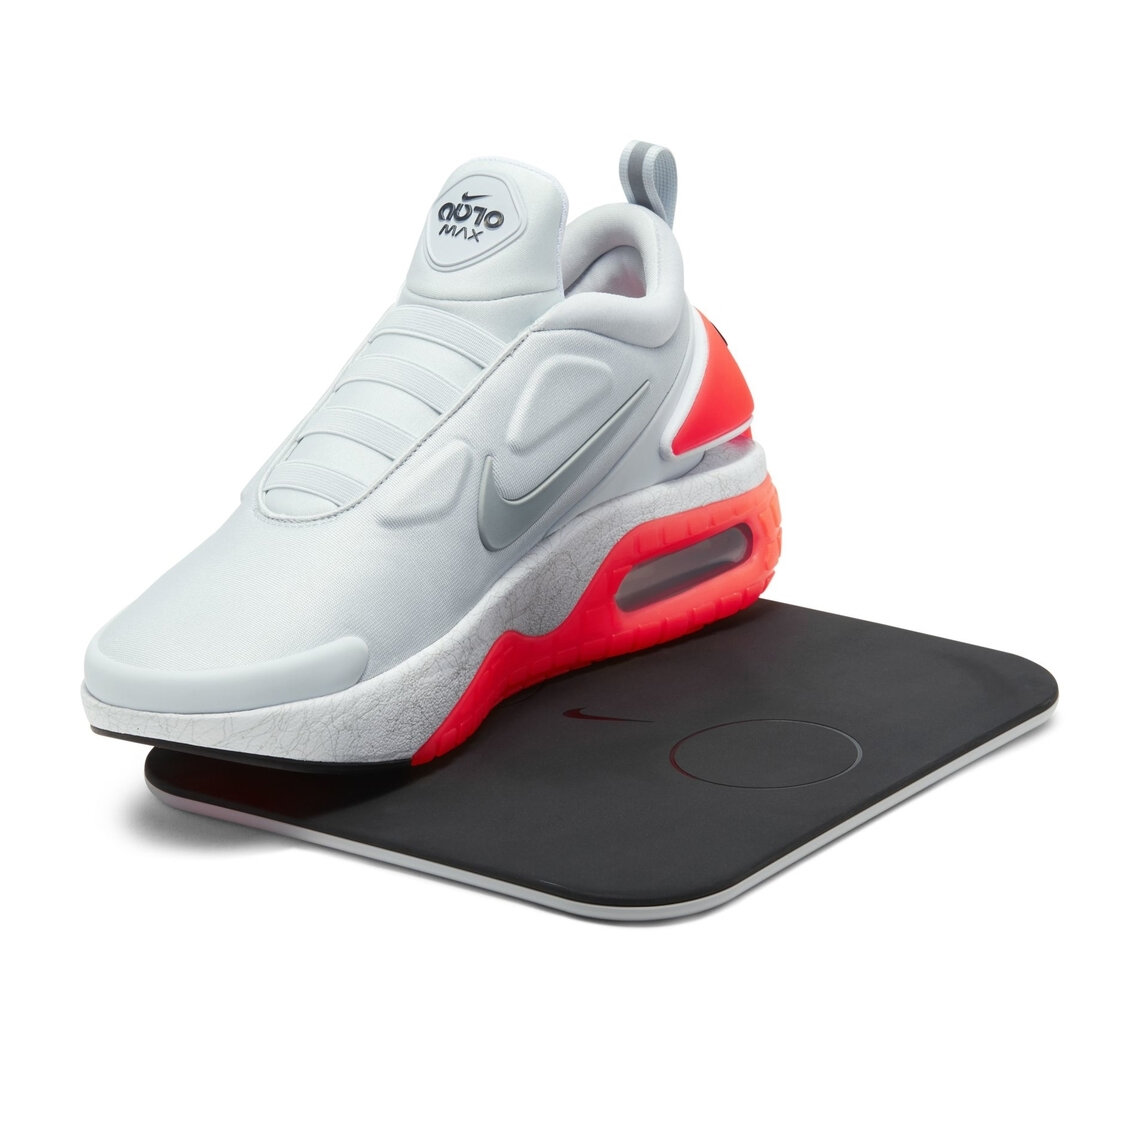 nike-adapt-auto-max-infrared-official-images-7.jpg